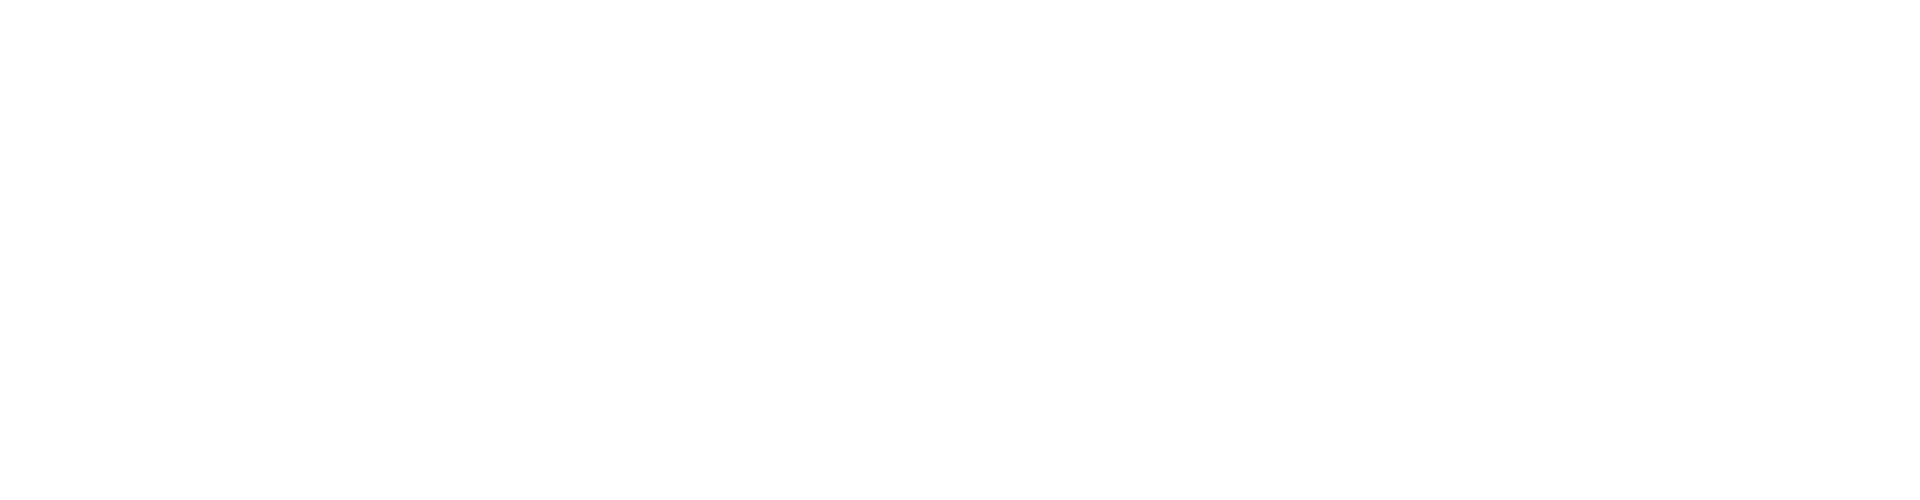 The Scuffed Series 20 - Spin the Saw